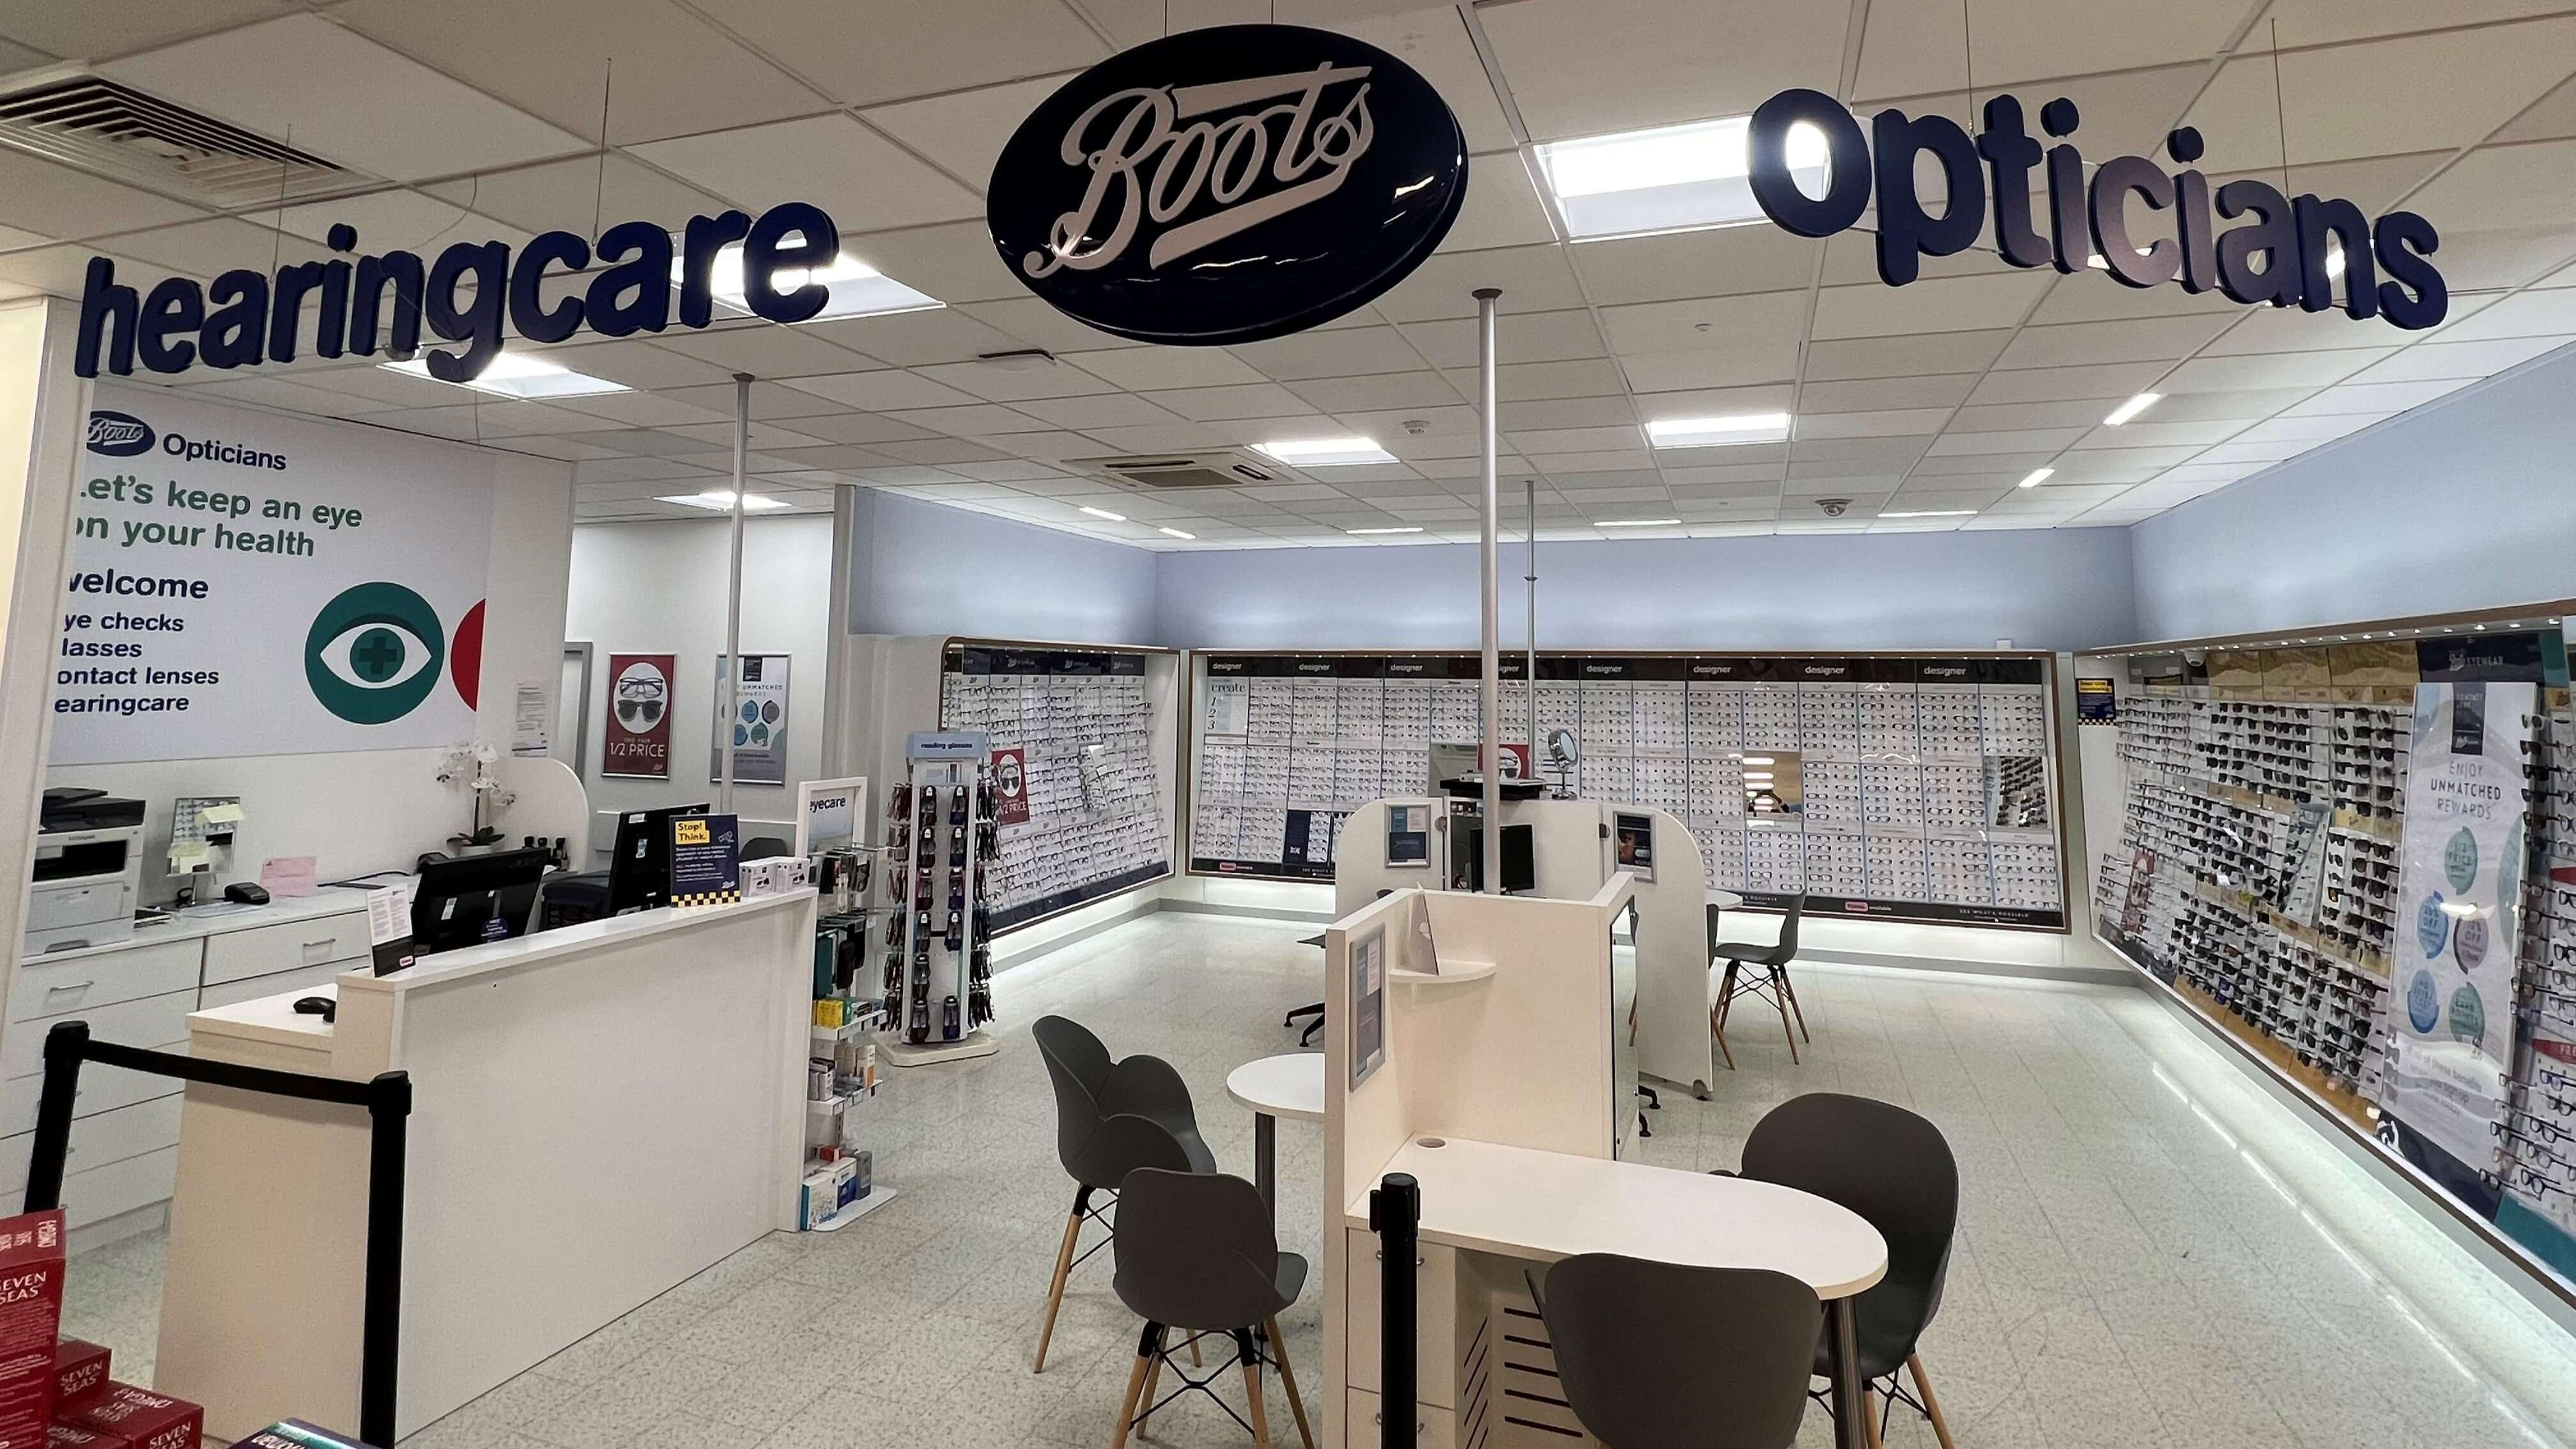 Boots Hearingcare Boots Hearingcare Broadstairs Broadstairs 03452 701600